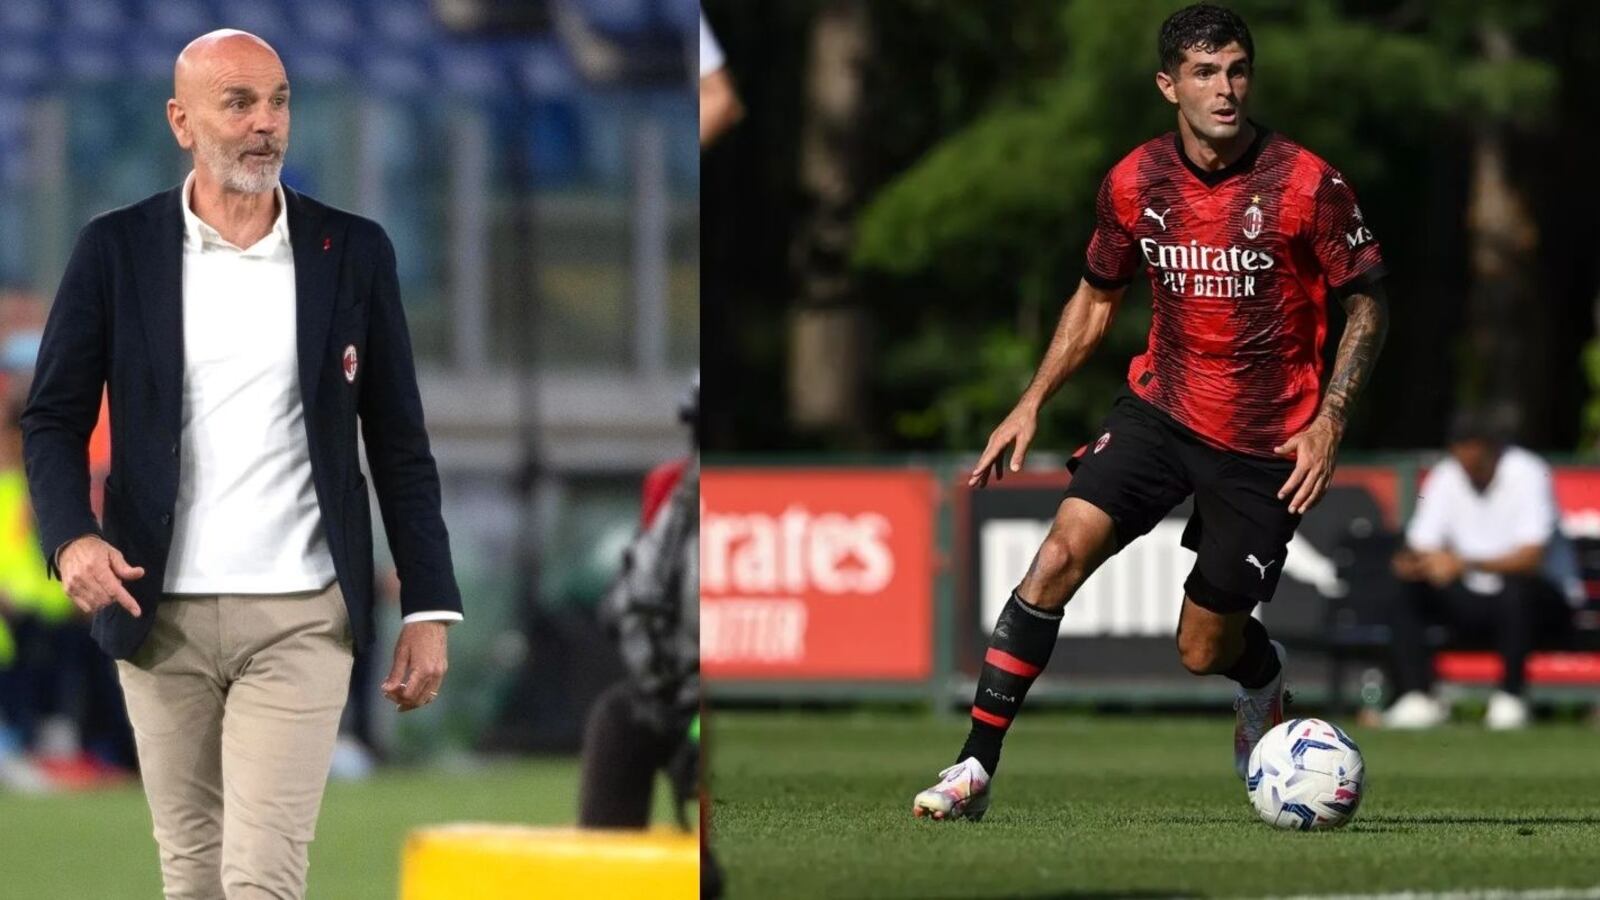 The reaction of the AC Milan coach after Christian Pulisic's pre-season